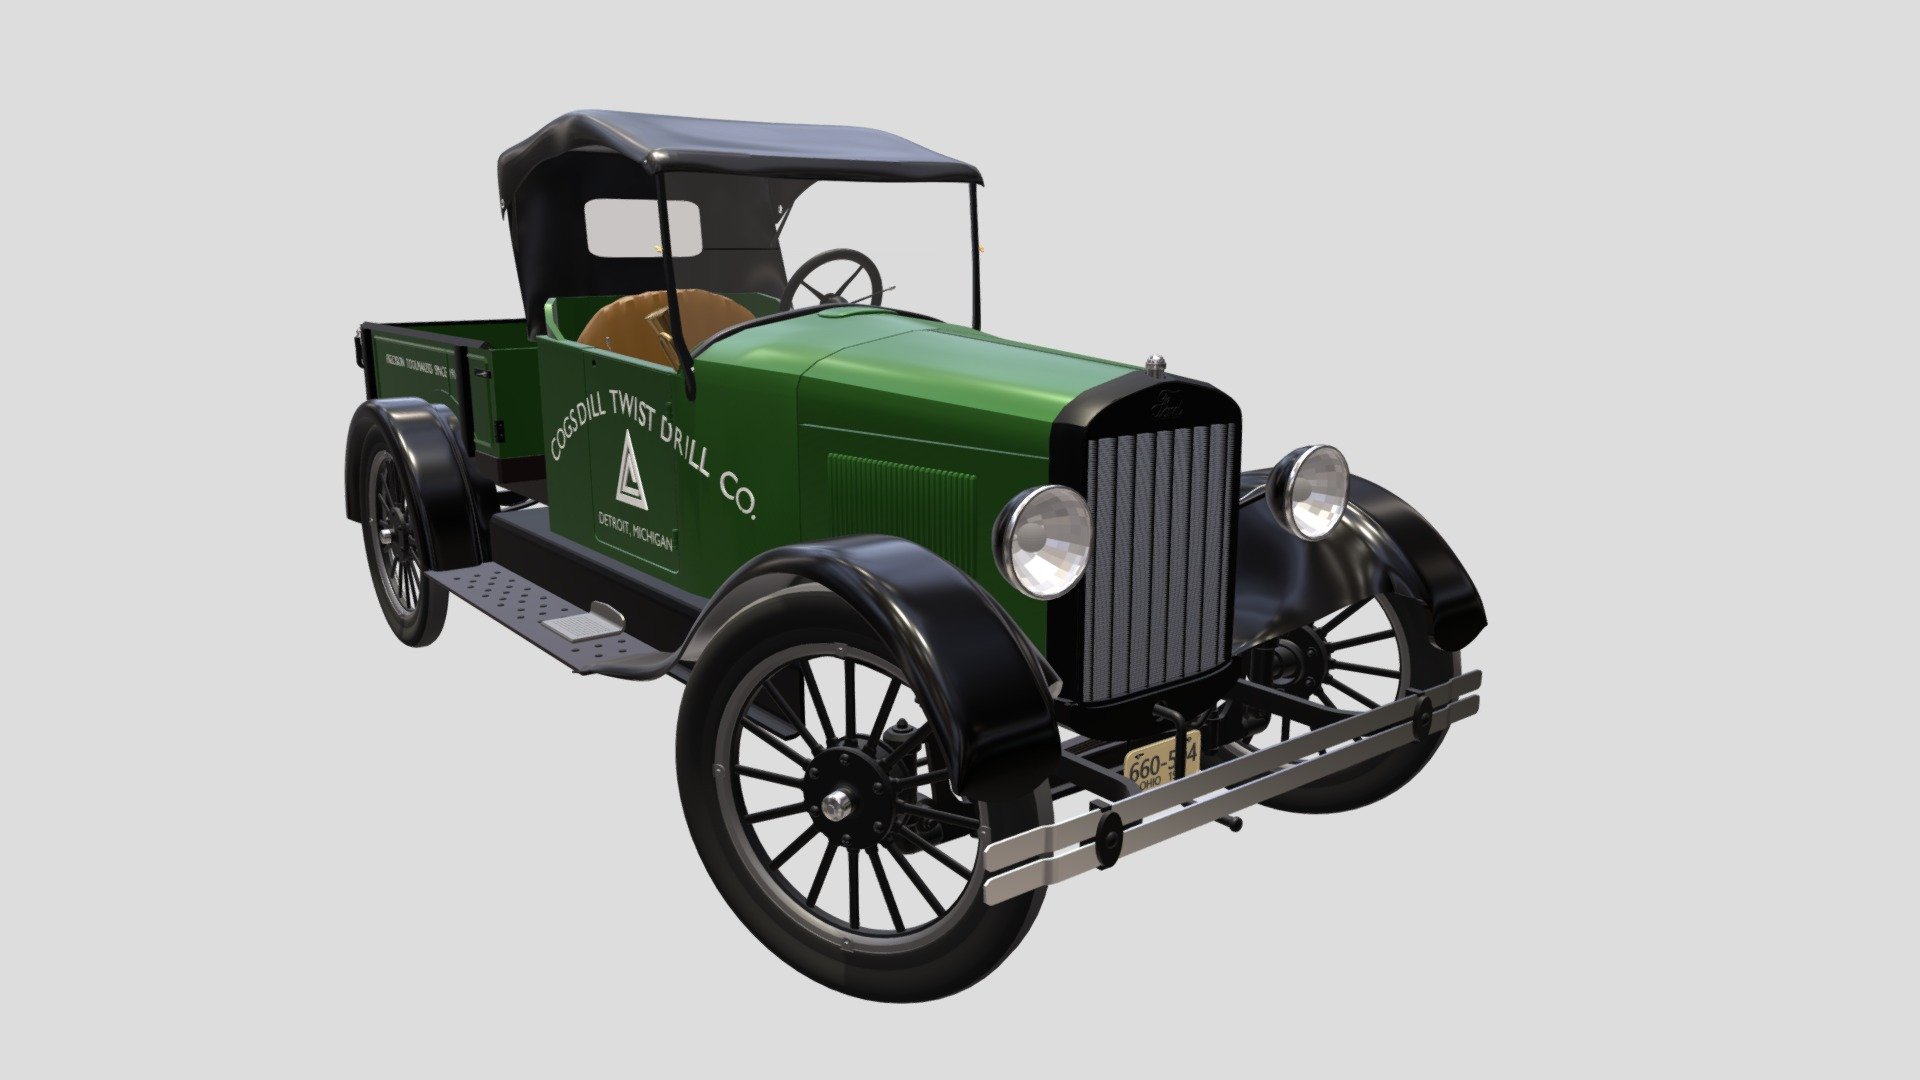 This is my model of the Model T we had on display at our company 3d model